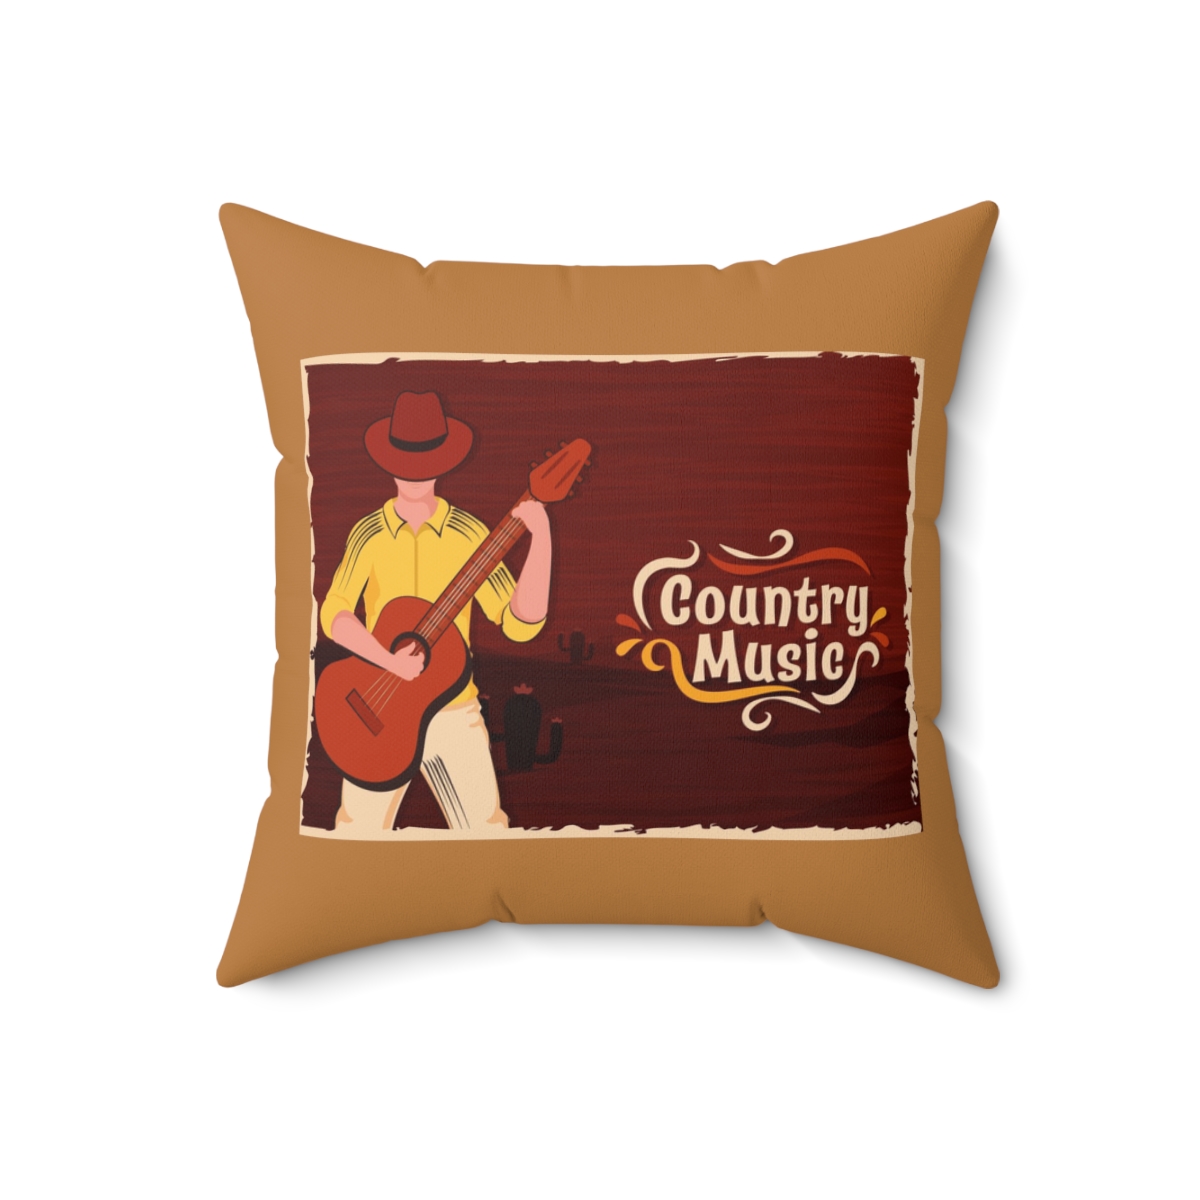 Square Pillows Country Music product thumbnail image